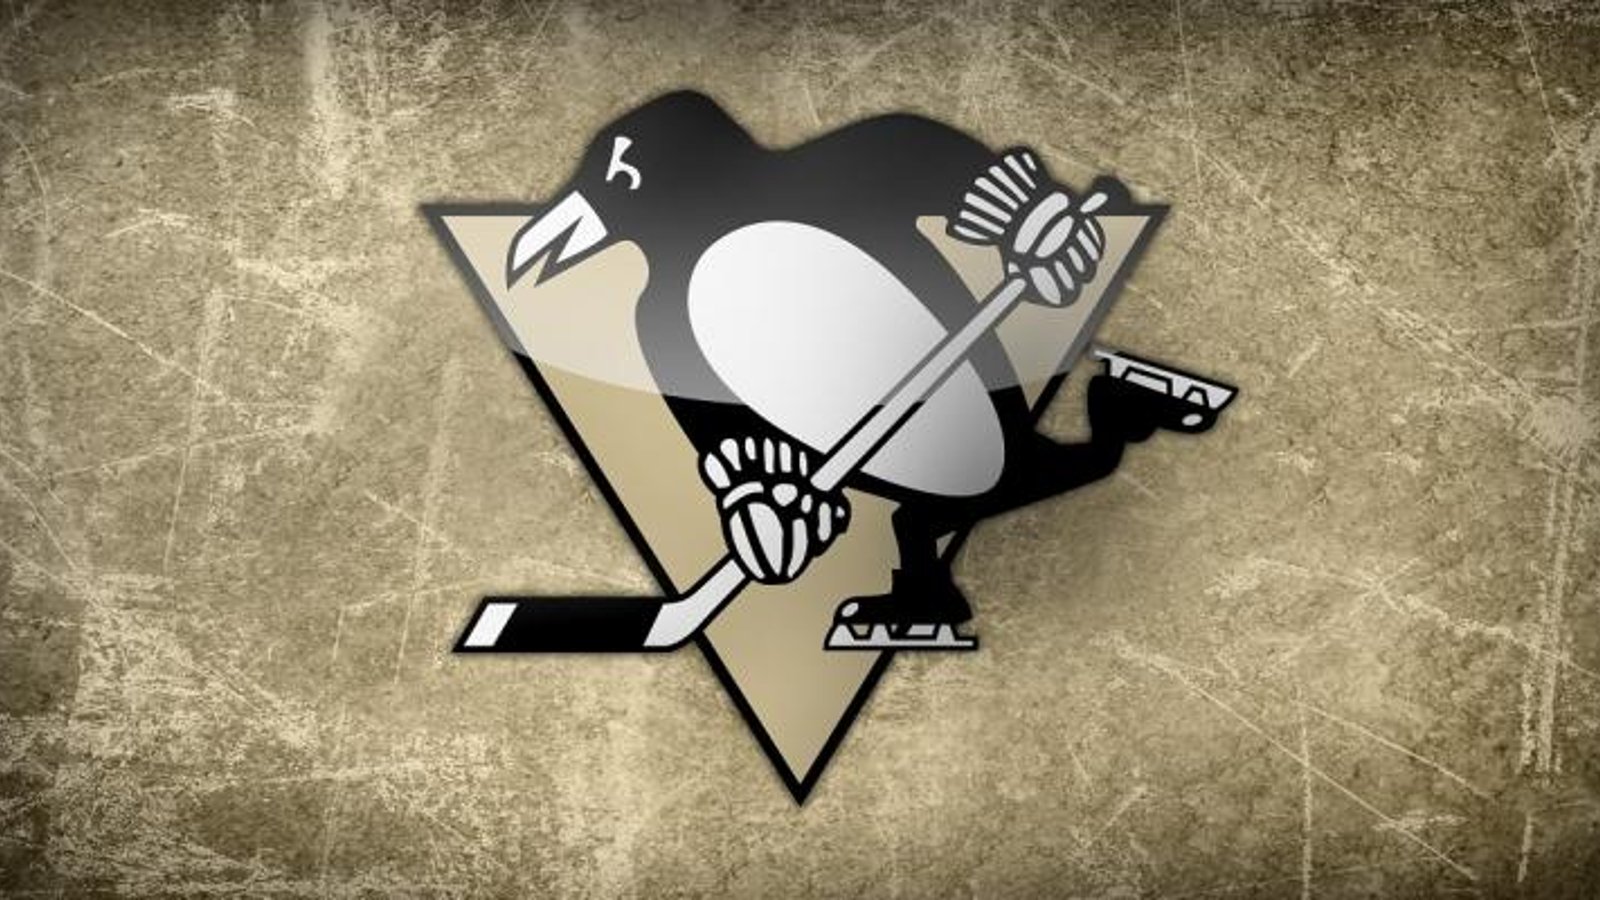 Penguins continue their hot streak against the Sabres!